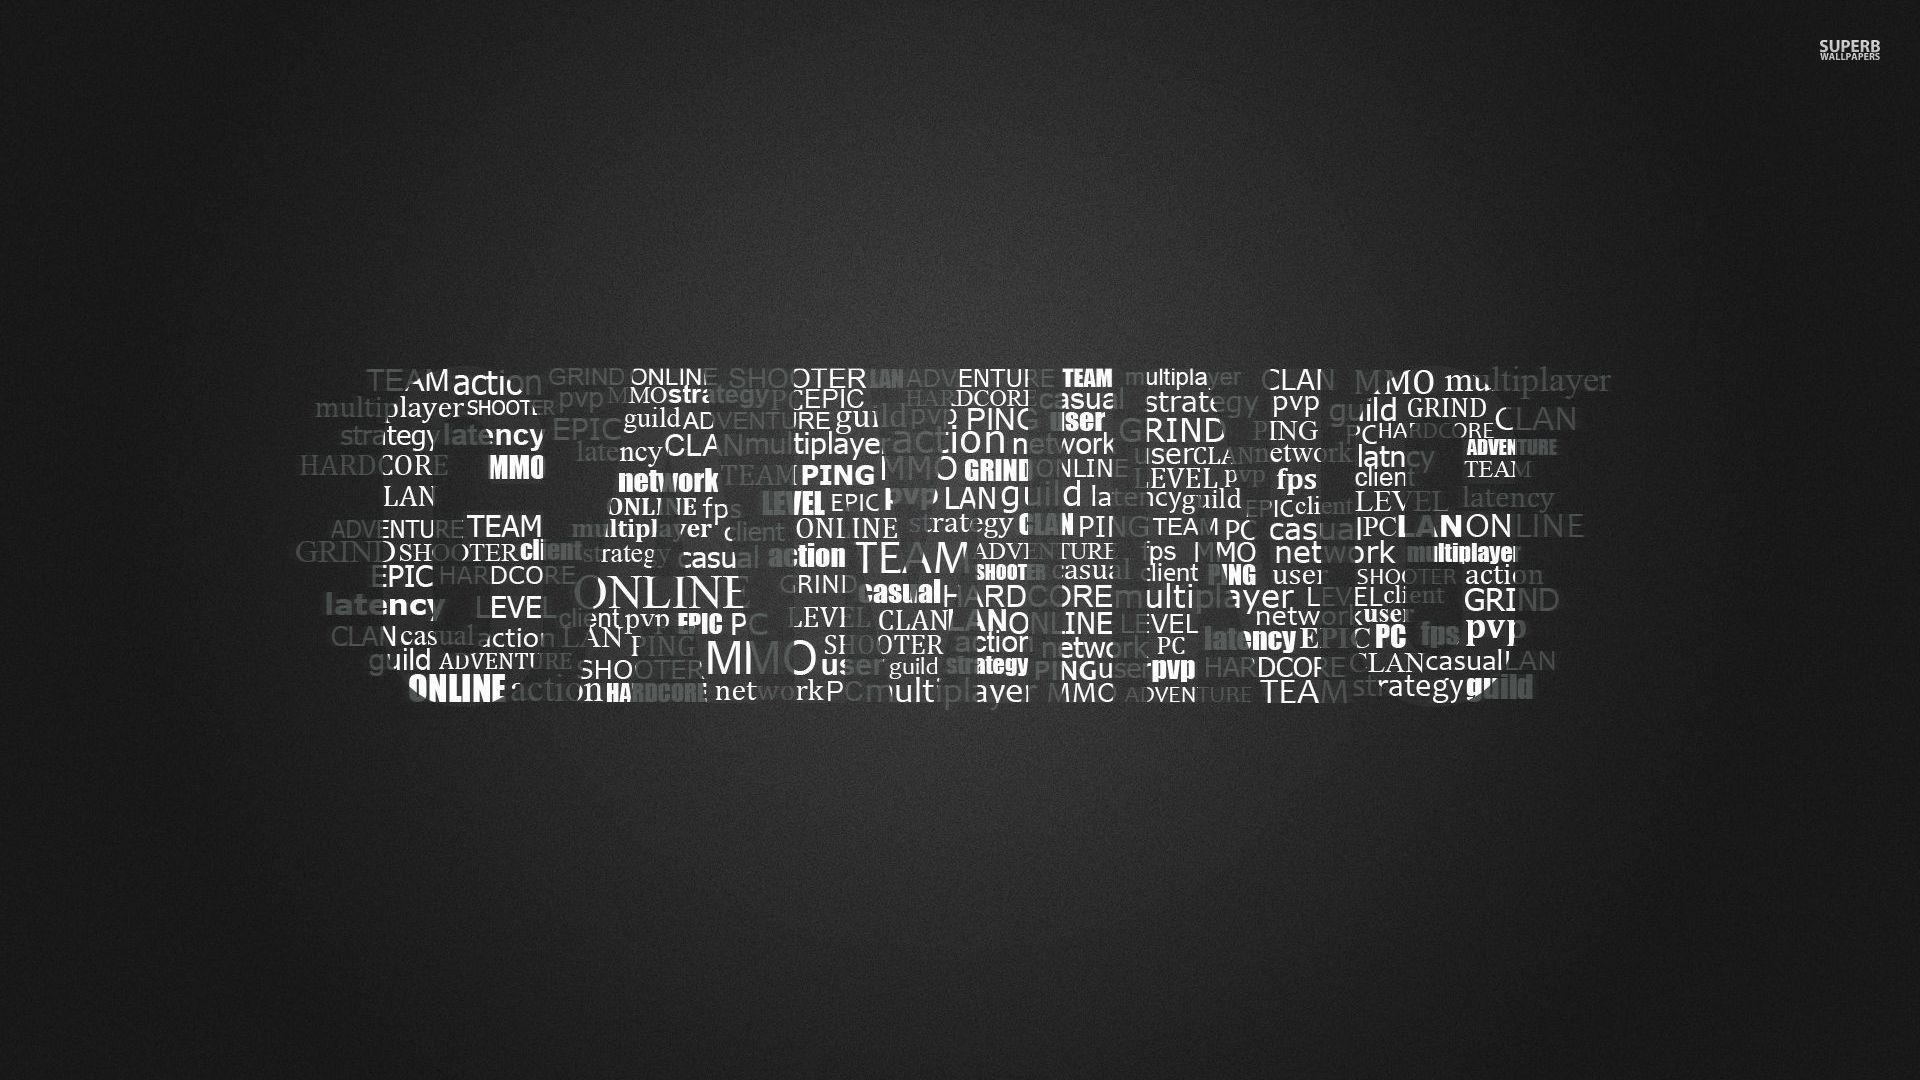 1920x1080 Backgrounds Pc Gaming Images Computer Games On Wallpaper For Gaming PC  Backgrounds Wallpapers)